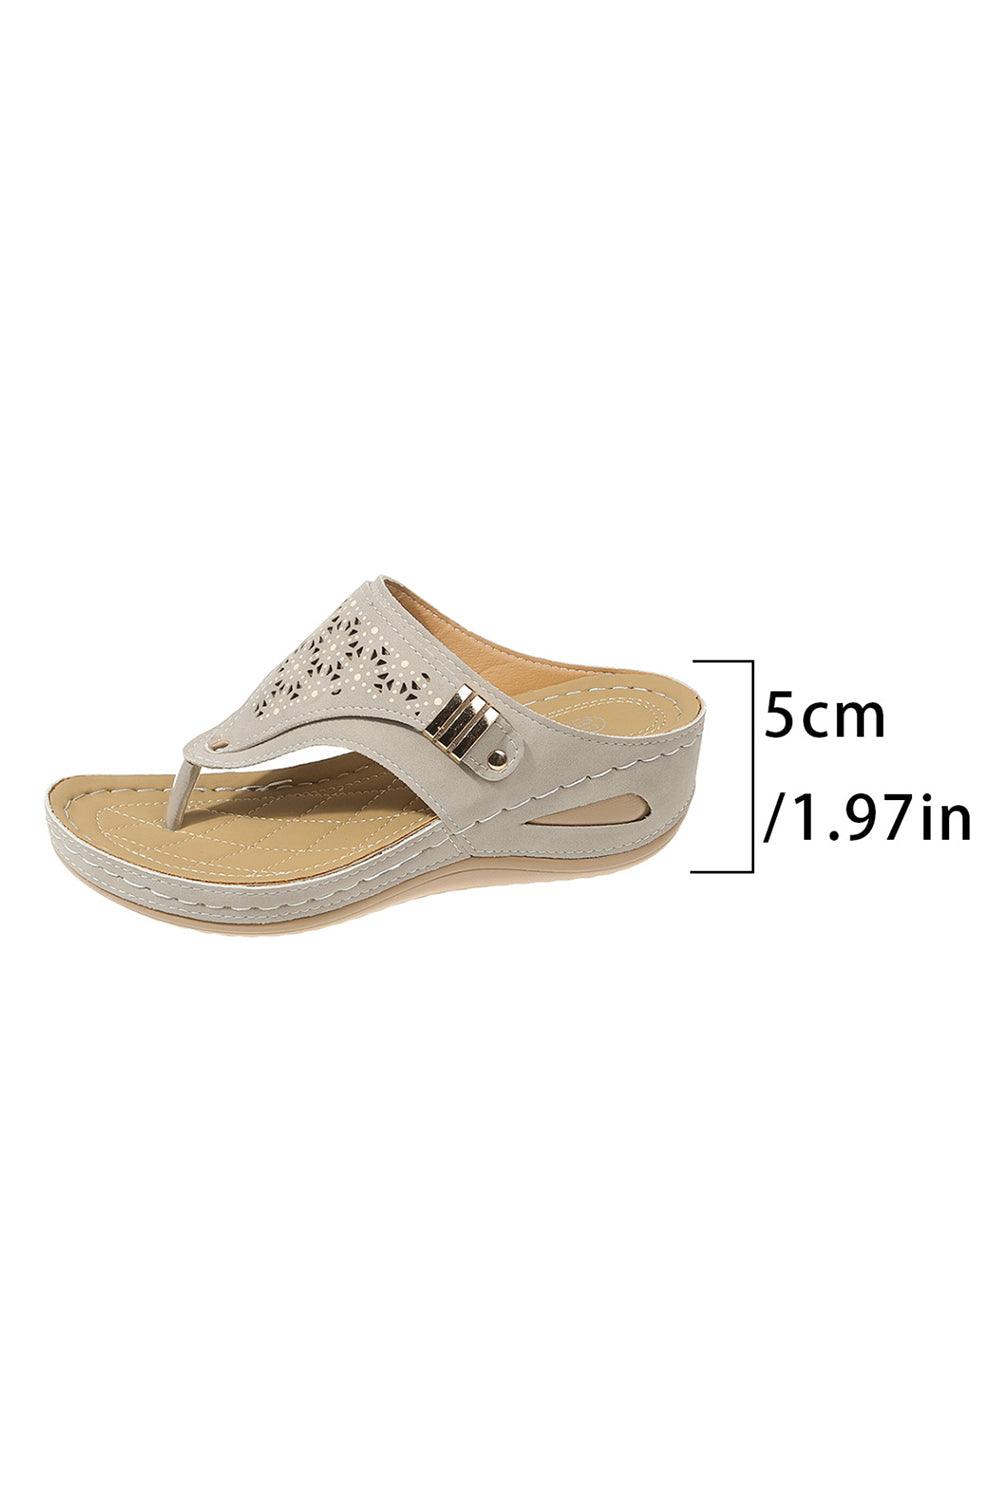 Beige Hollow Out Clip Toe Wedge Slippers - L & M Kee, LLC